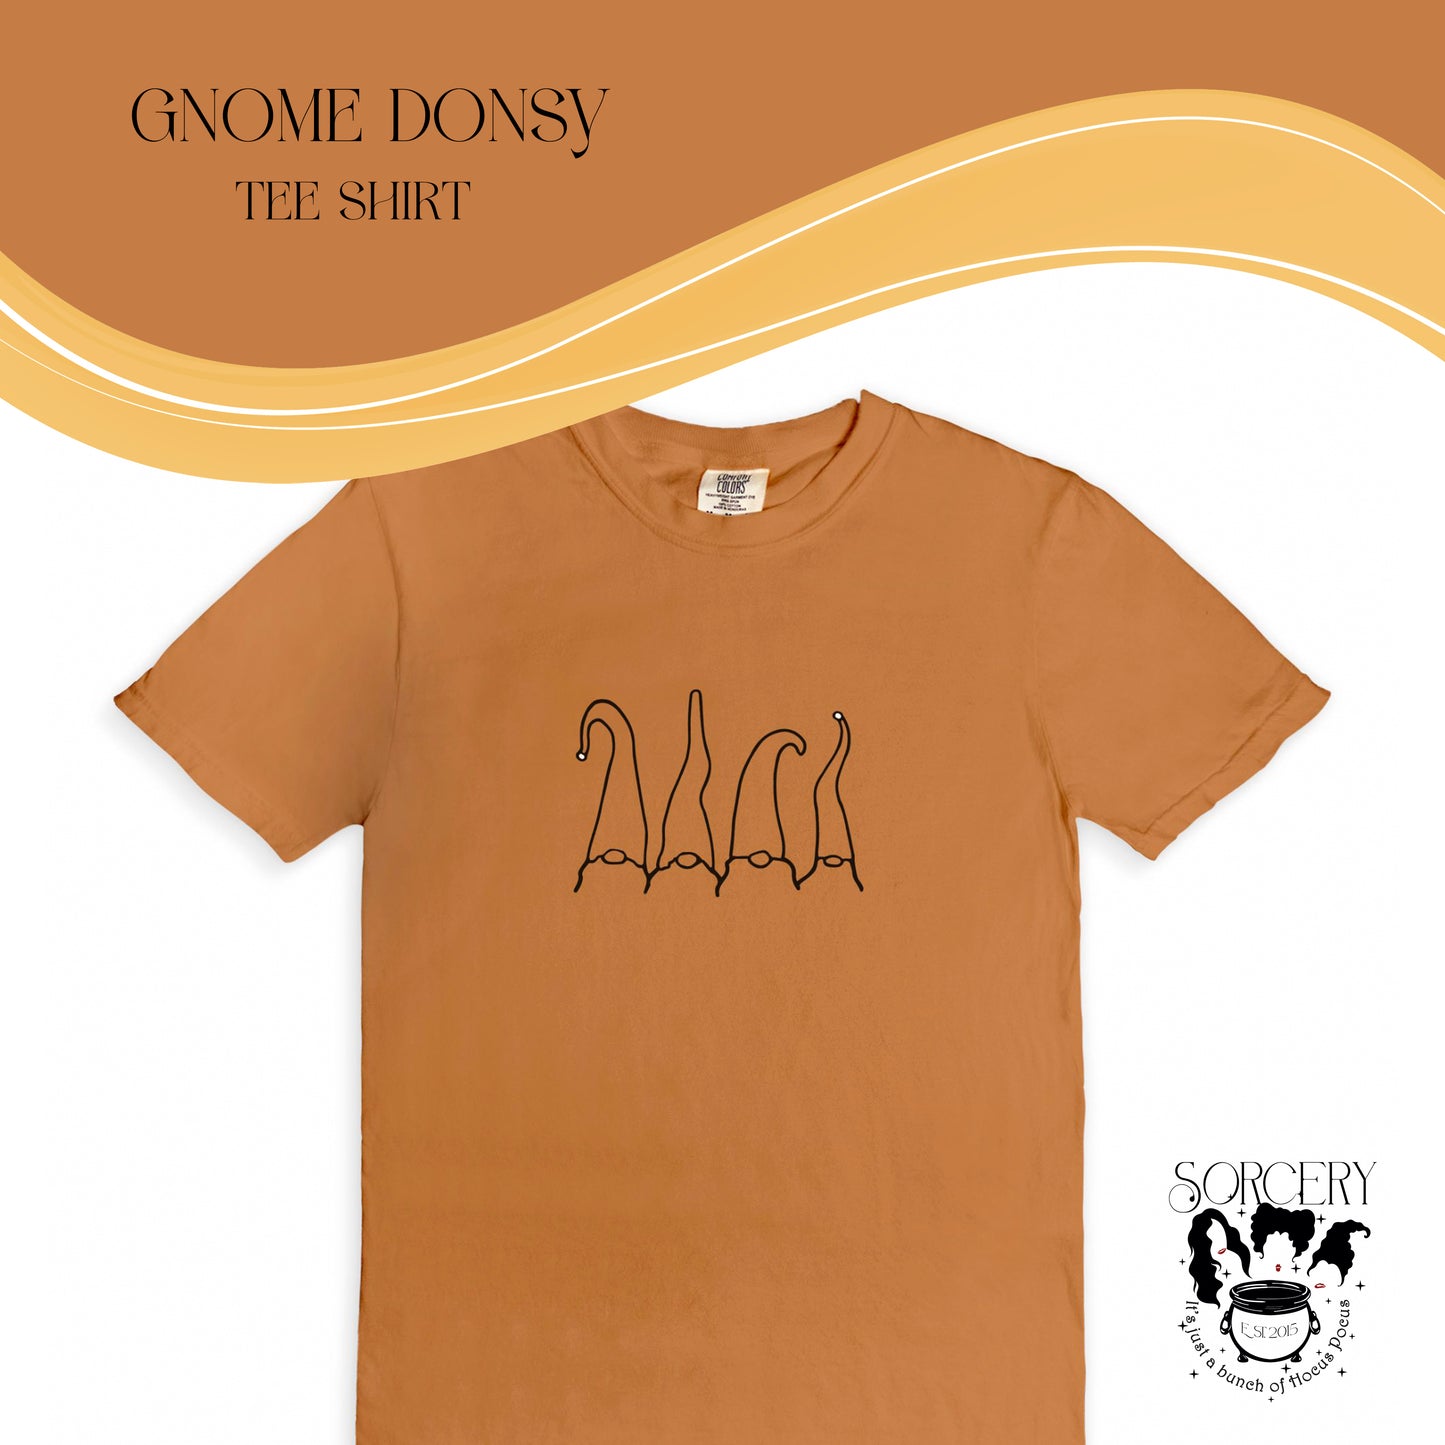 Gnome Donsy Tee Shirt by Sorcery Soap + Hocus Pocus Crafts